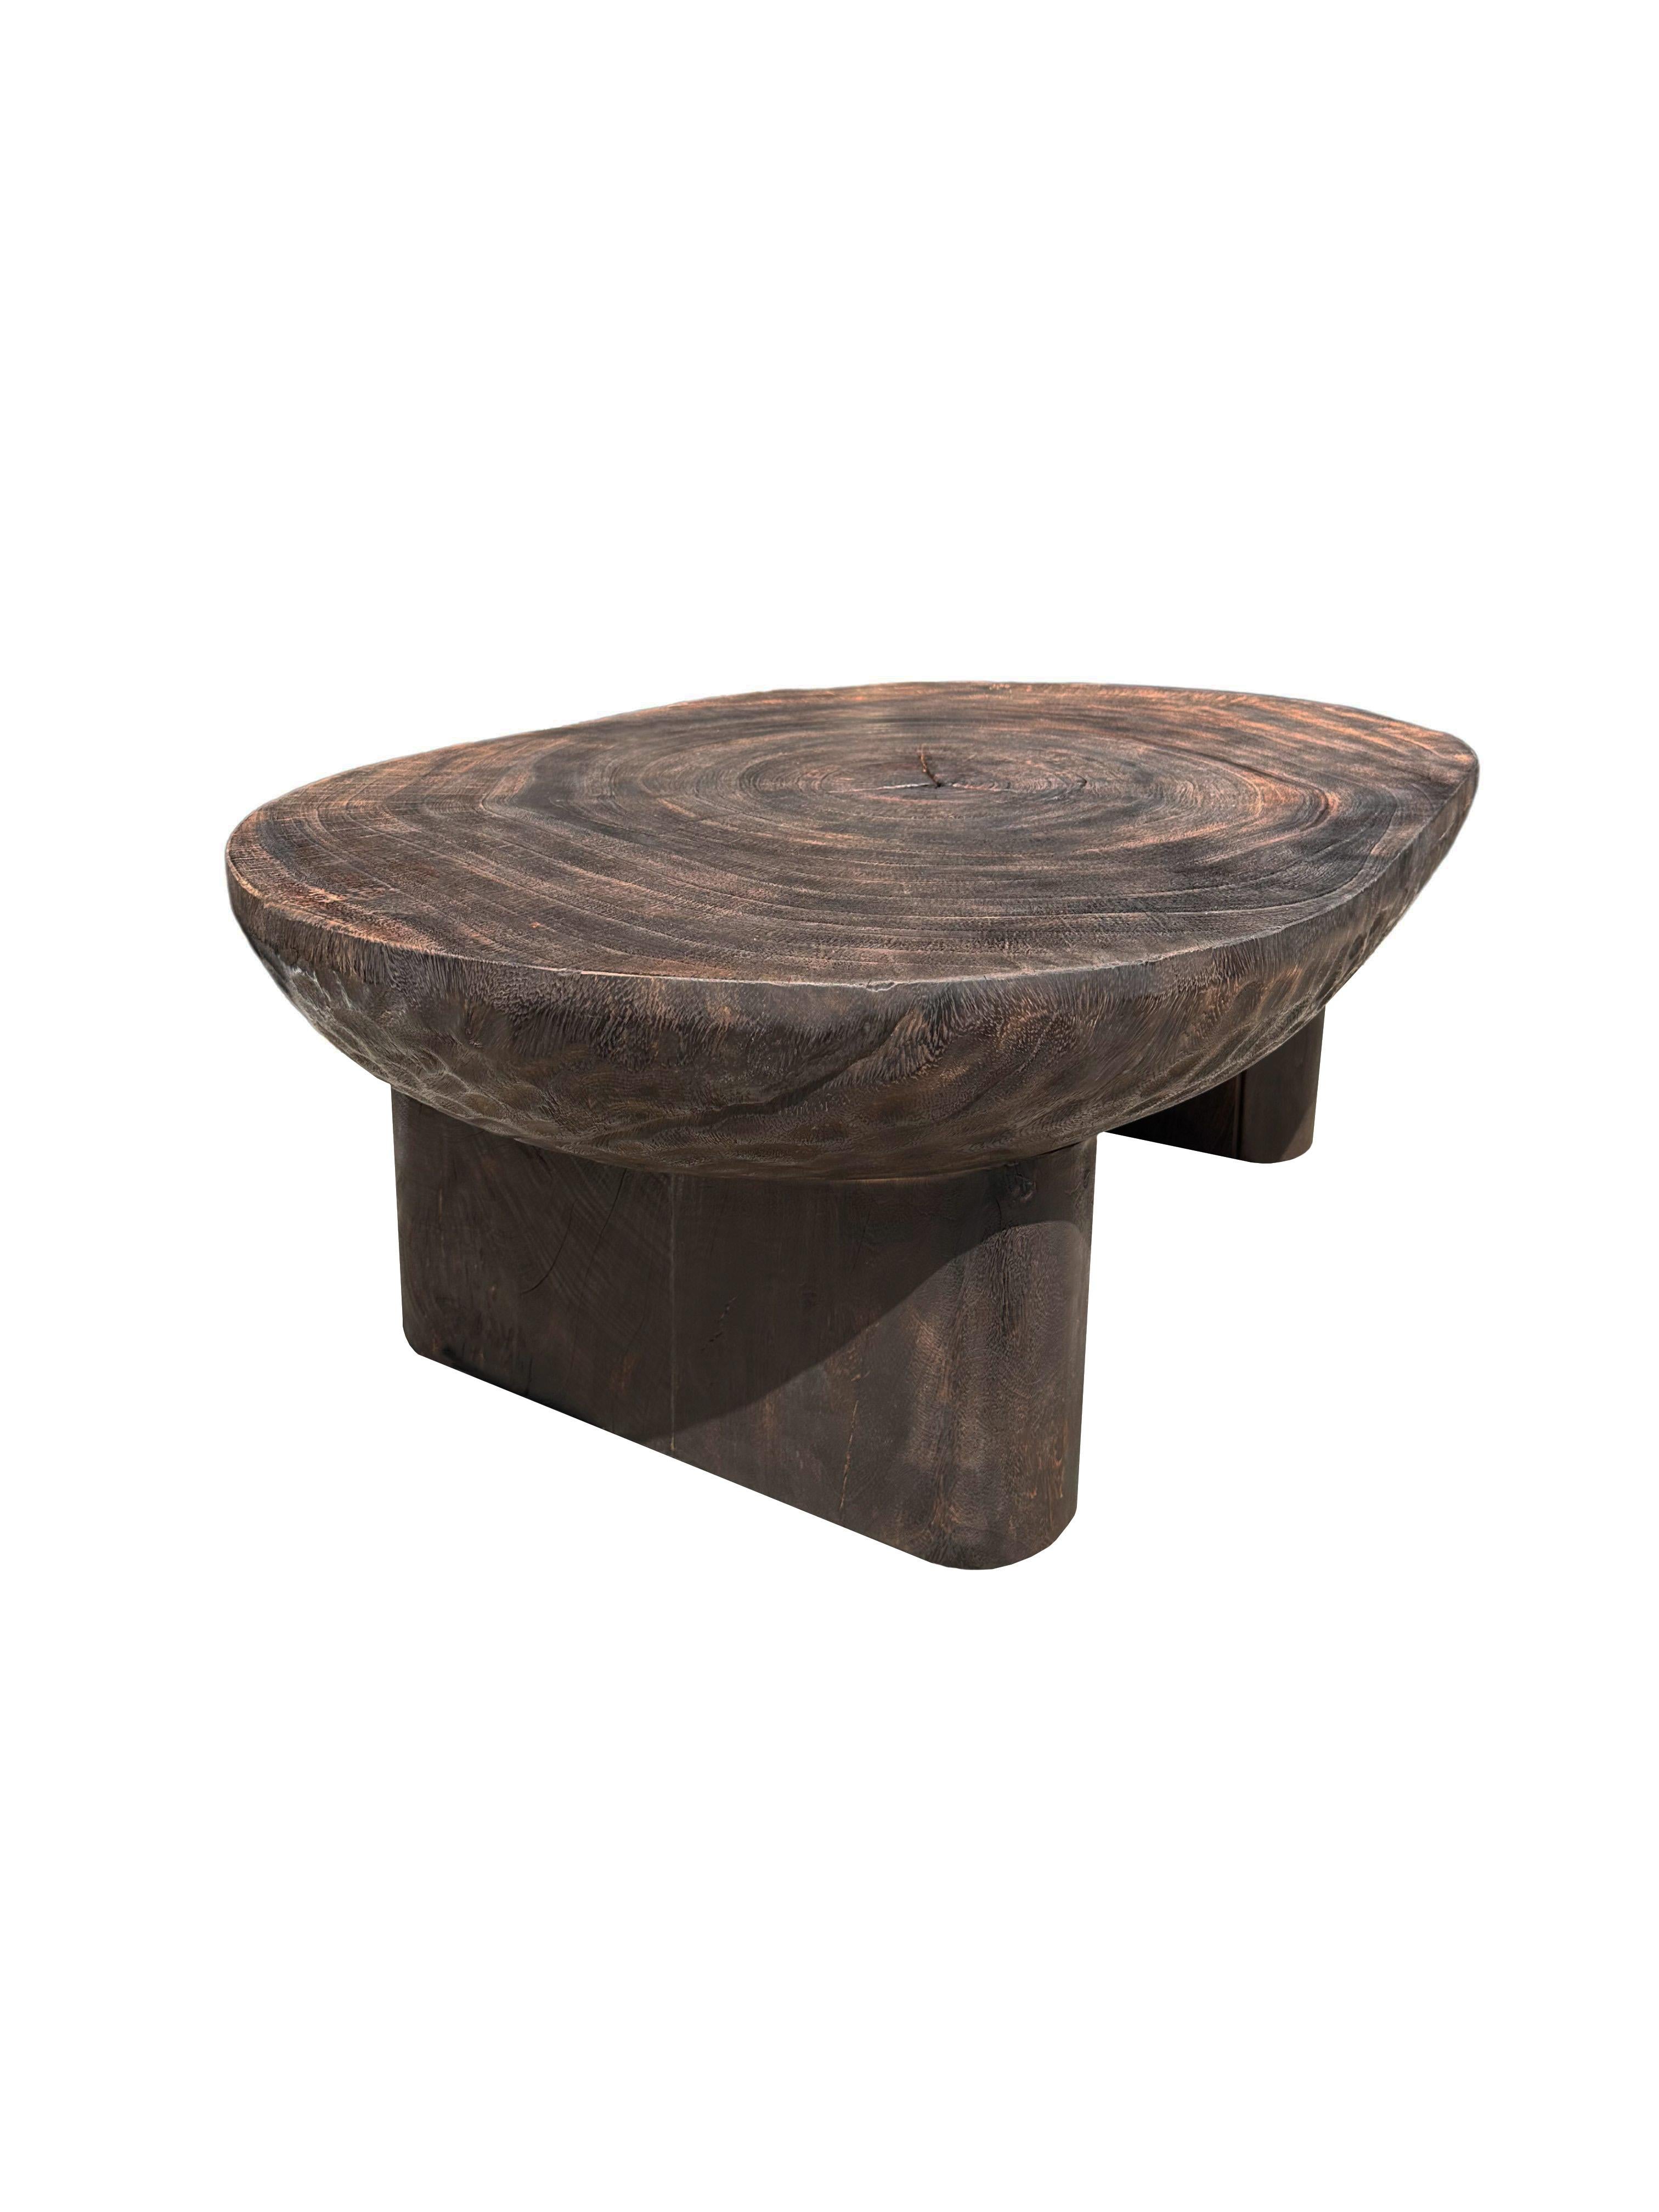 Contemporary Suar Wood Table Hand-Hewn Detailing Espresso Finish, Modern Organic For Sale